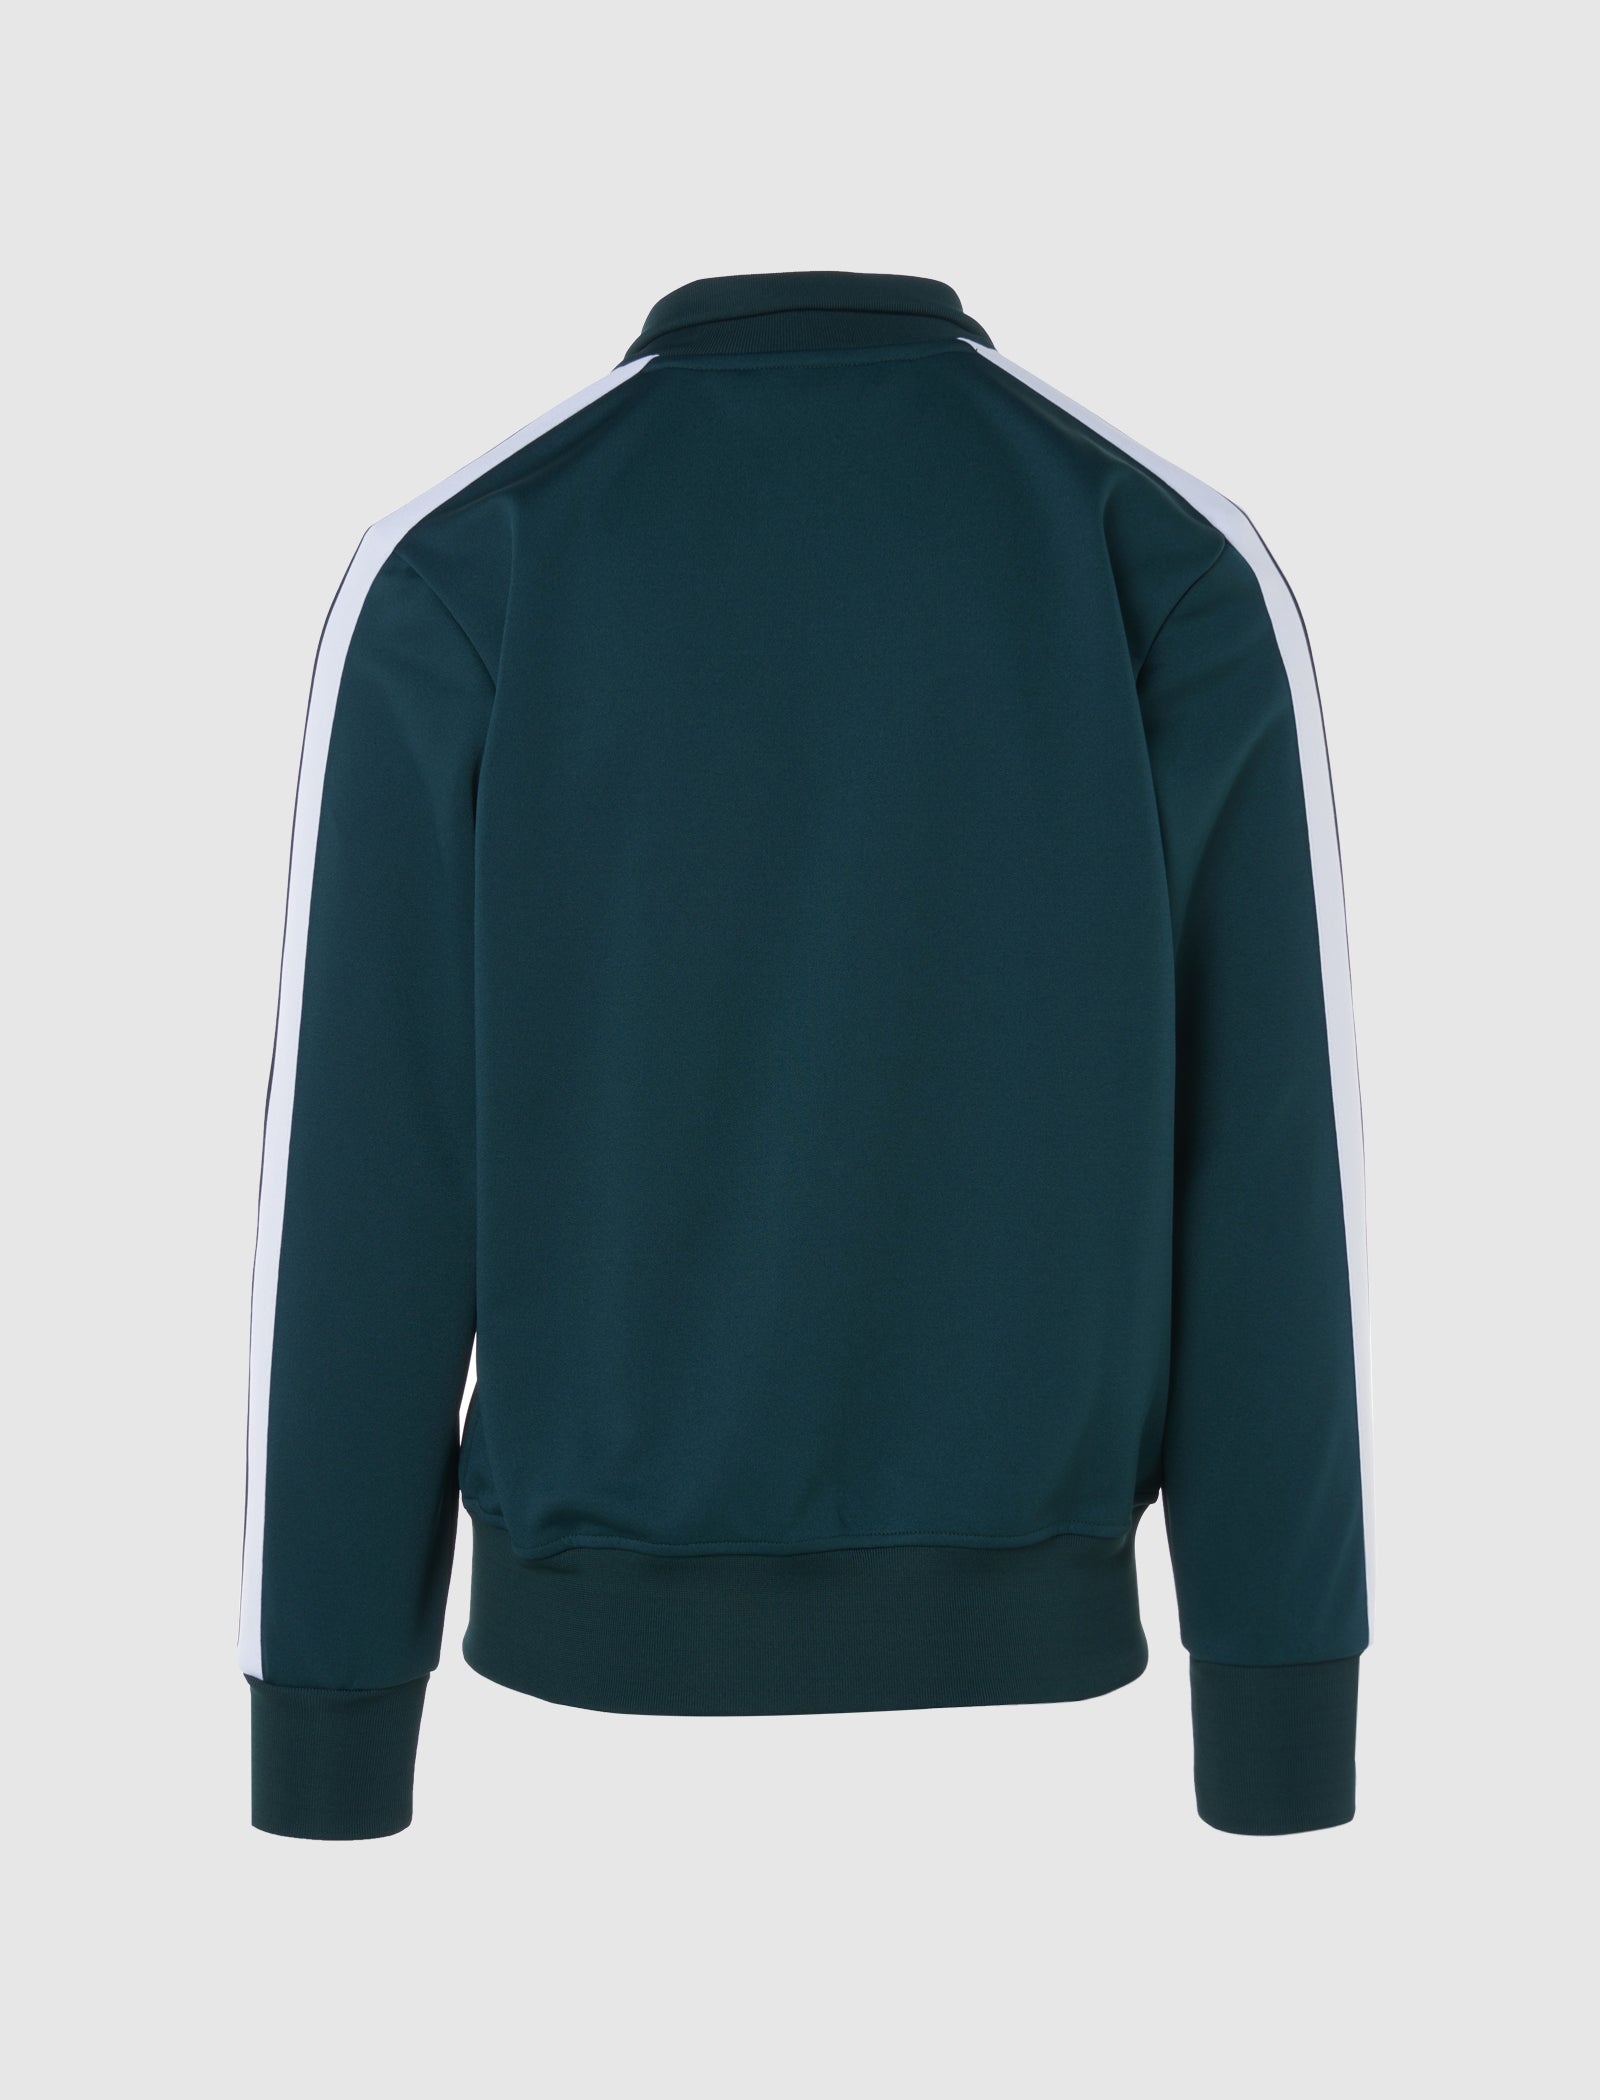 Green Classic Track Jacket by Palm Angels on Sale